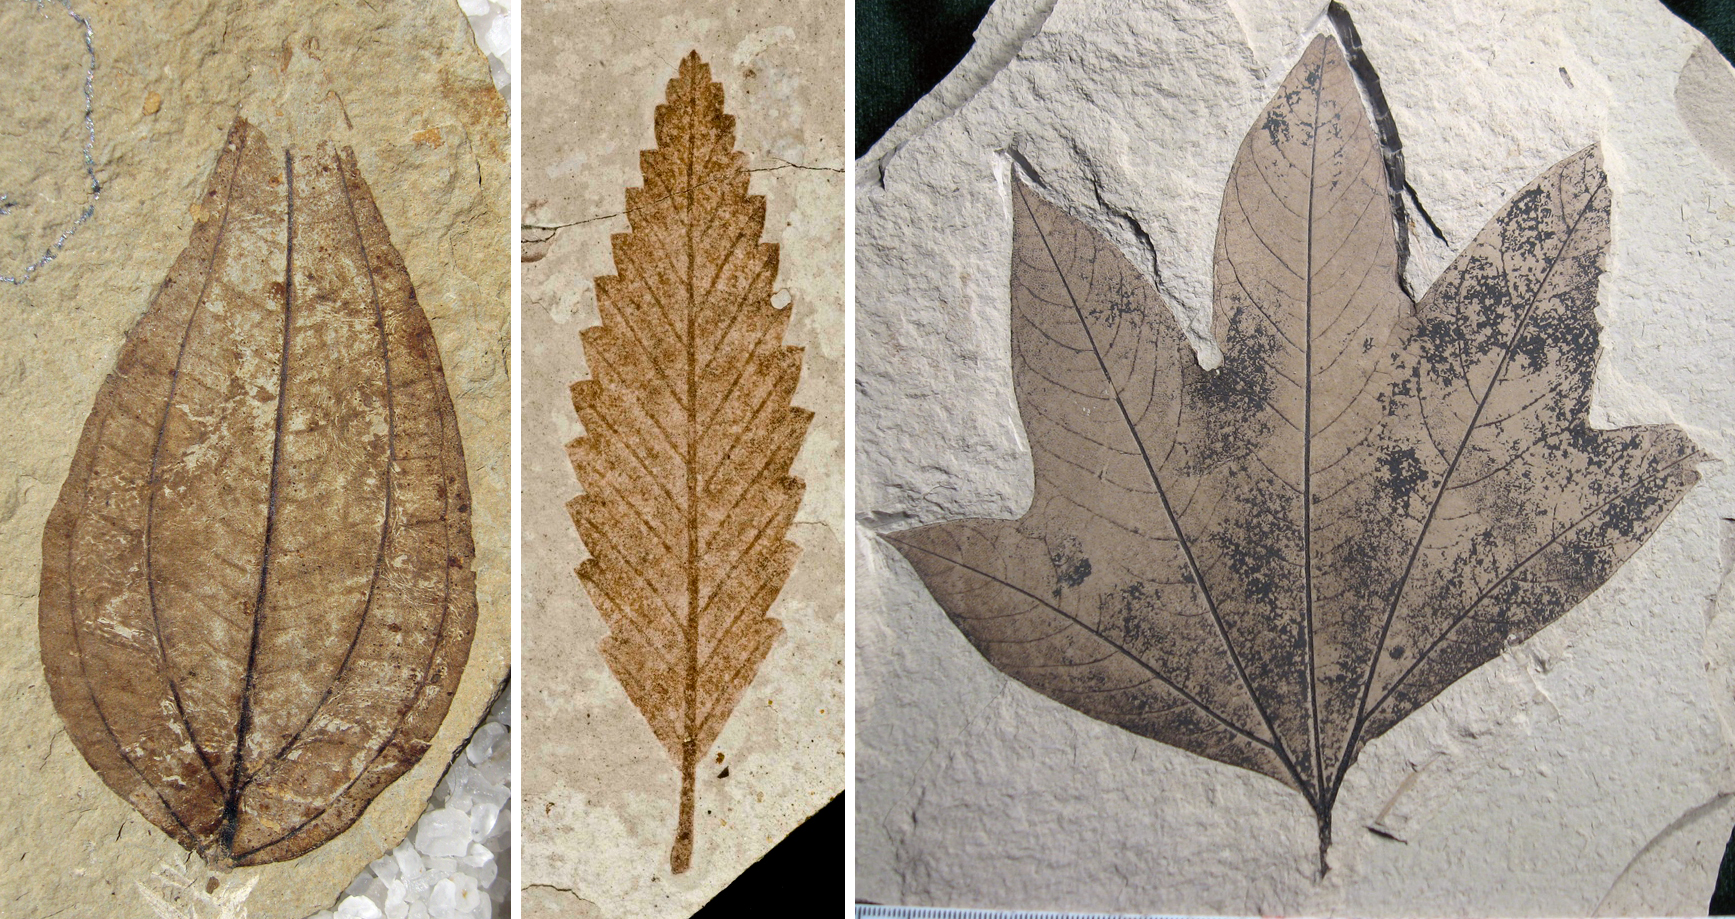 3-Panel photographic image of fossil leaves. Left: Leaf with entire (completely smooth) margin. Center: Birch family leaf with toothed margin. Right: Leaf of an extinct sycamore with 5 lobes.